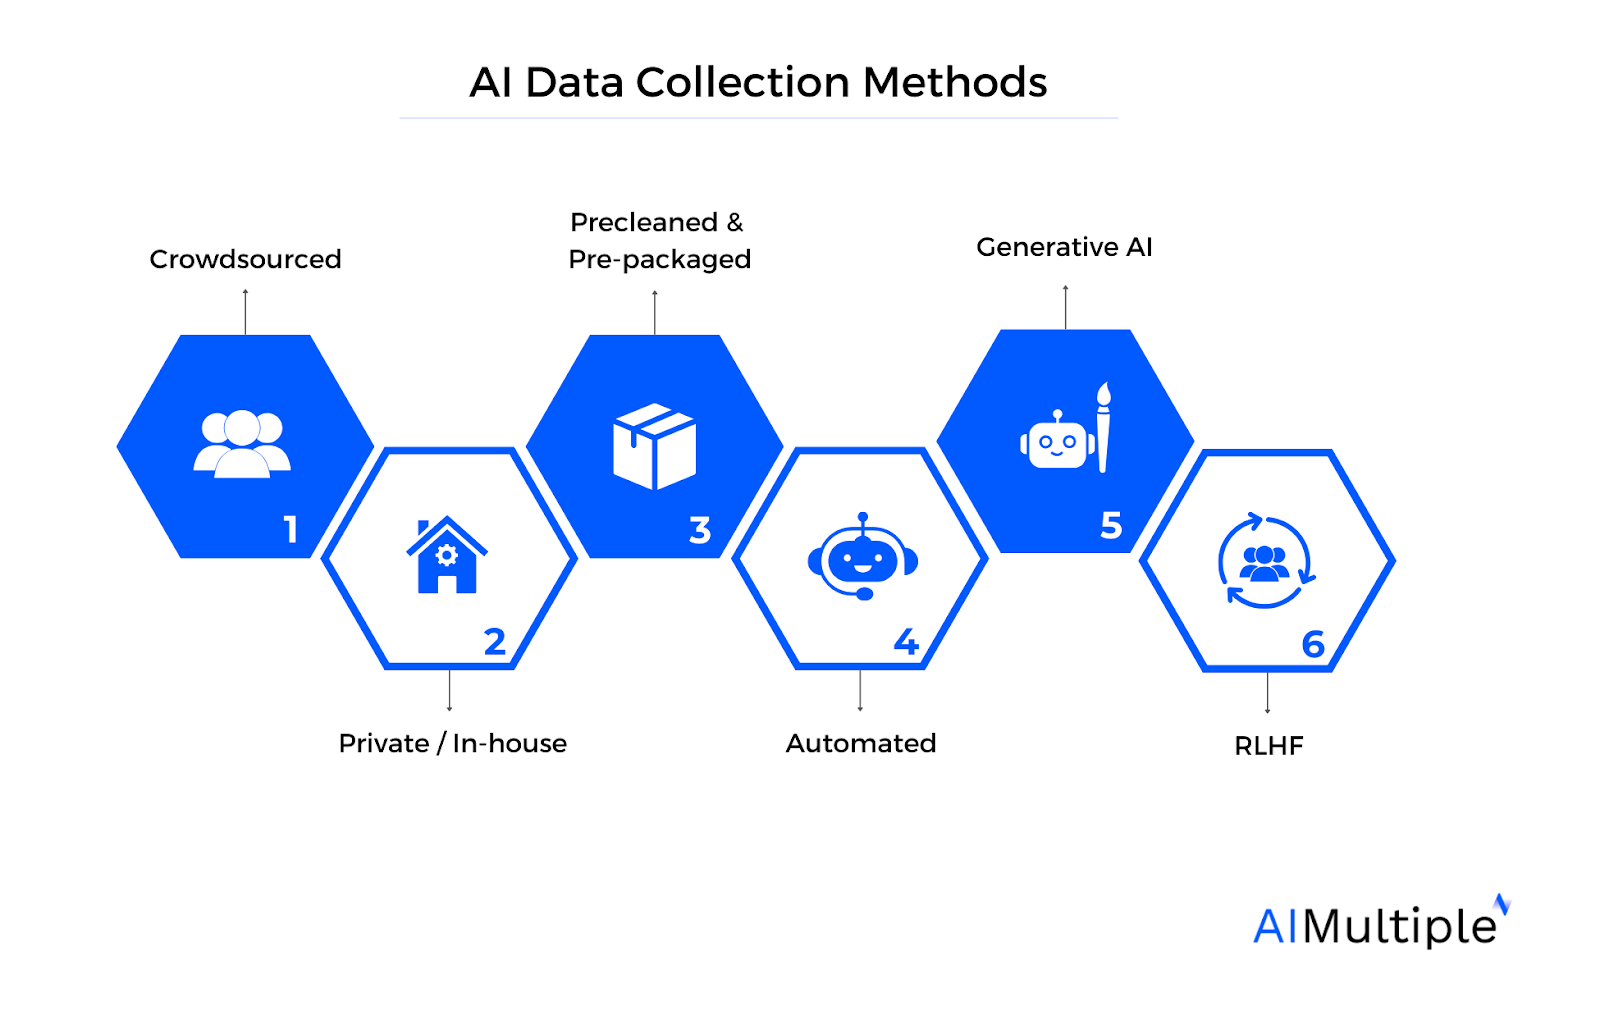 AI visual listing the top 6 AI data collection methods listed previously.